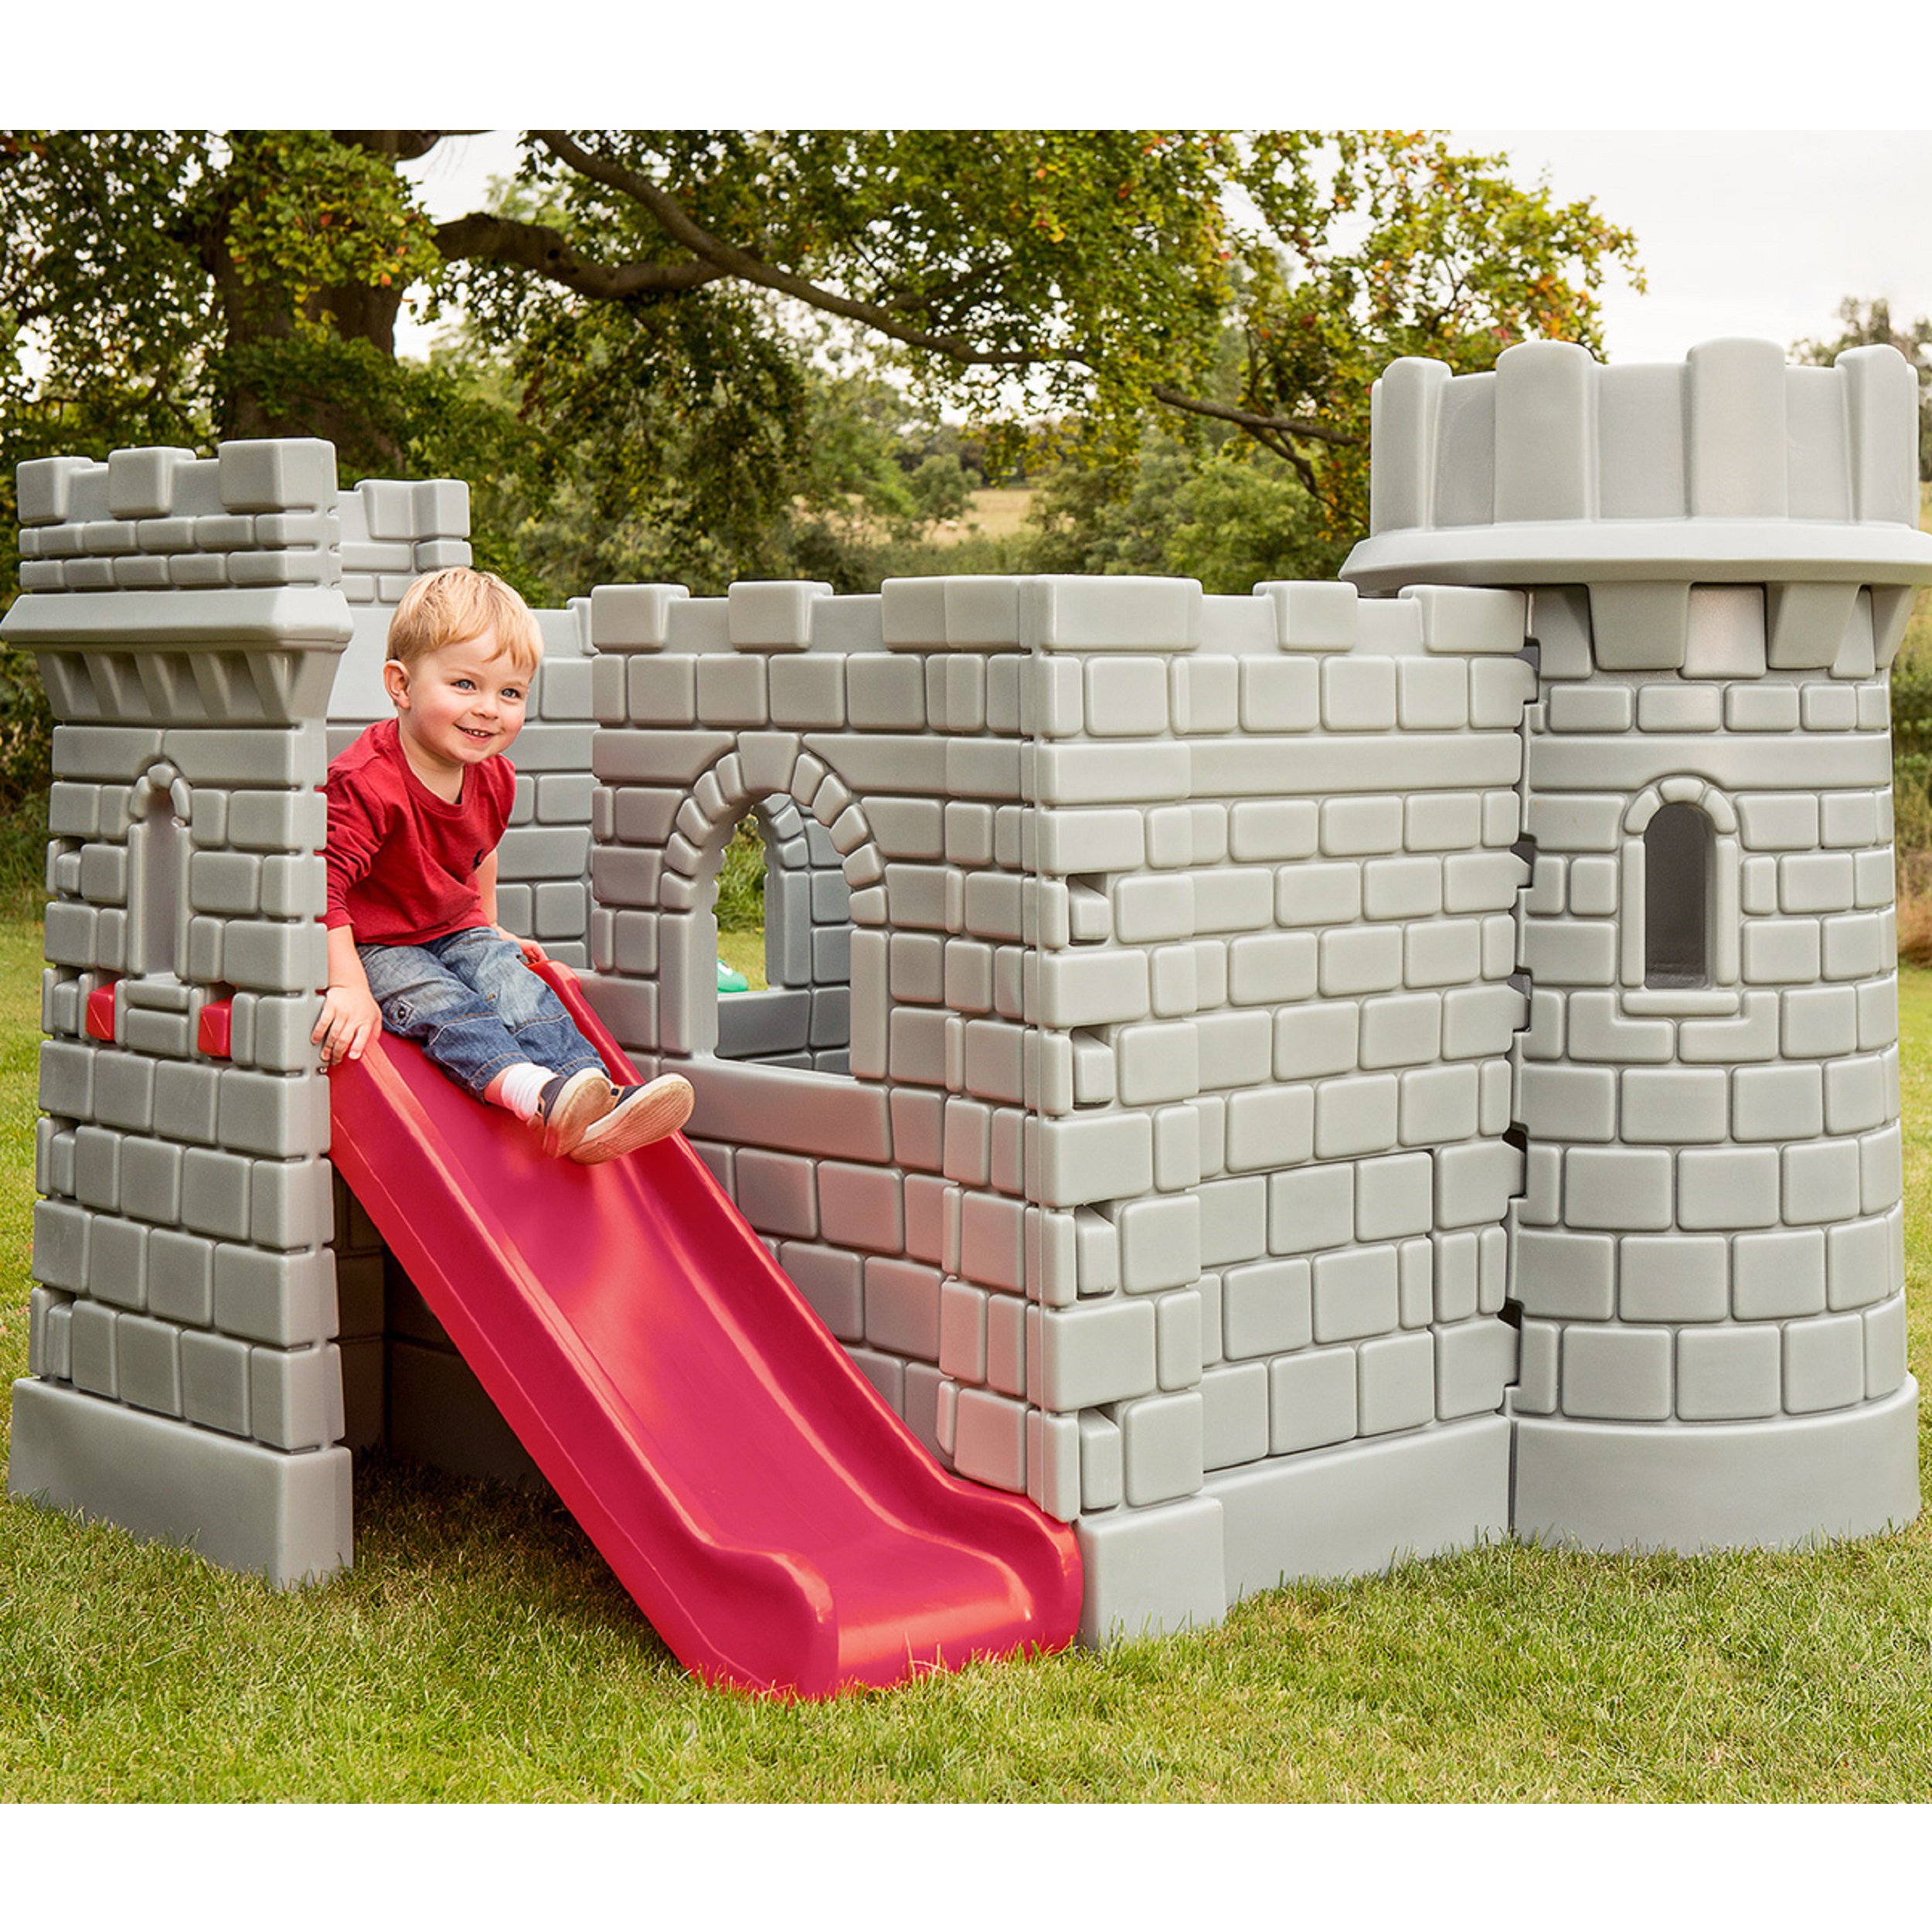 Little Tikes Classic Castle Jungle Gym Playhouse - image 4 of 6